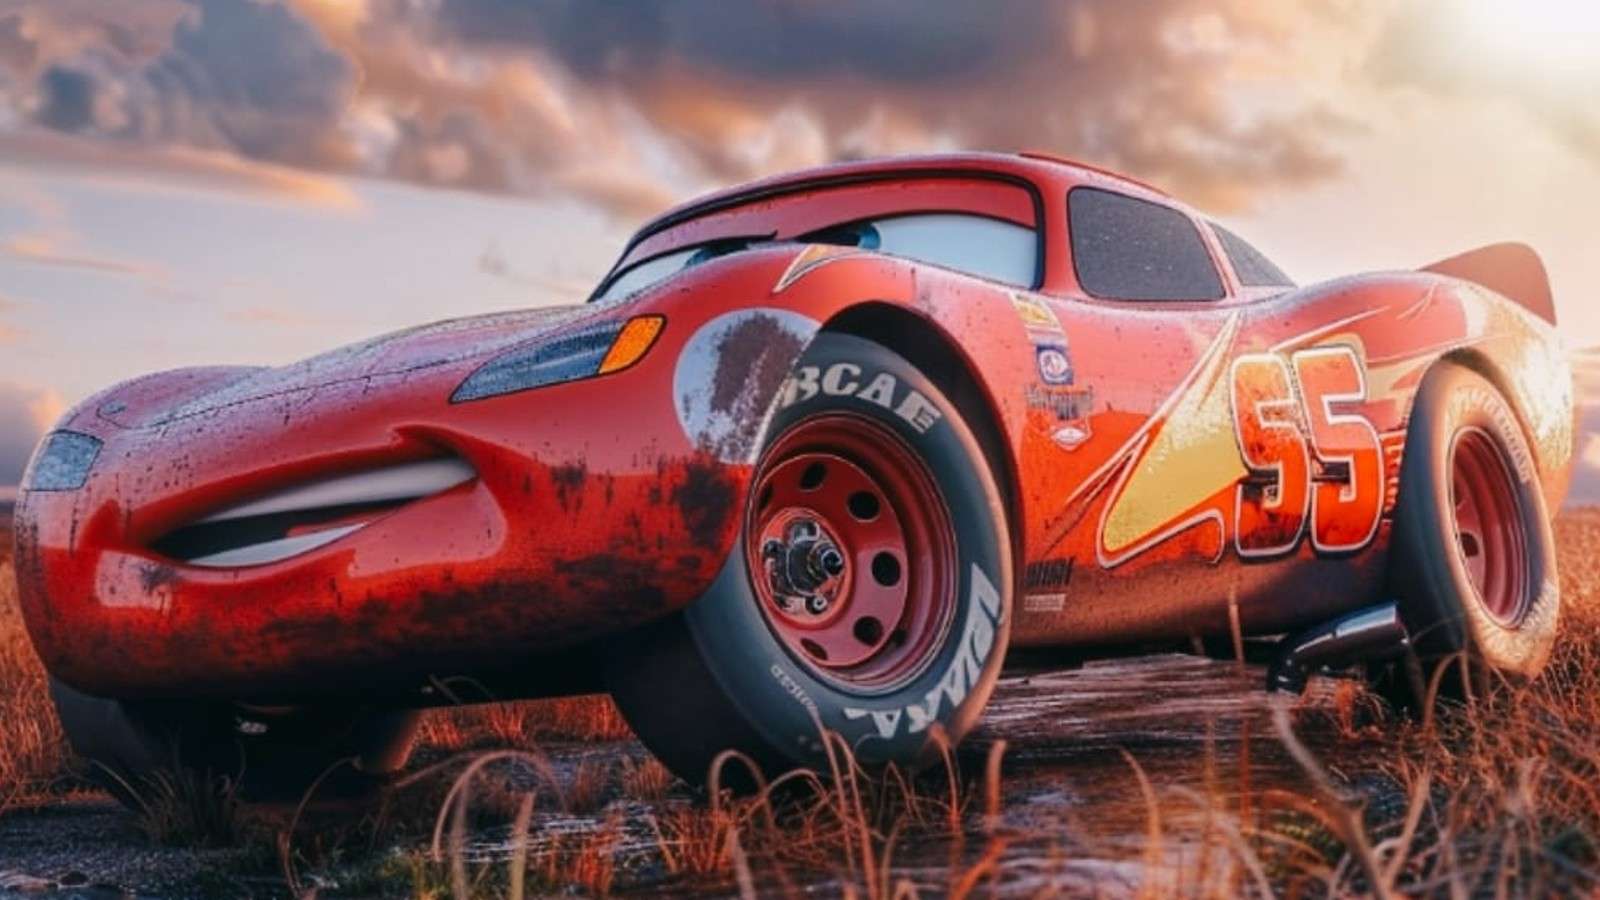 Lightning McQueen on the fake poster for the live-action Cars remake